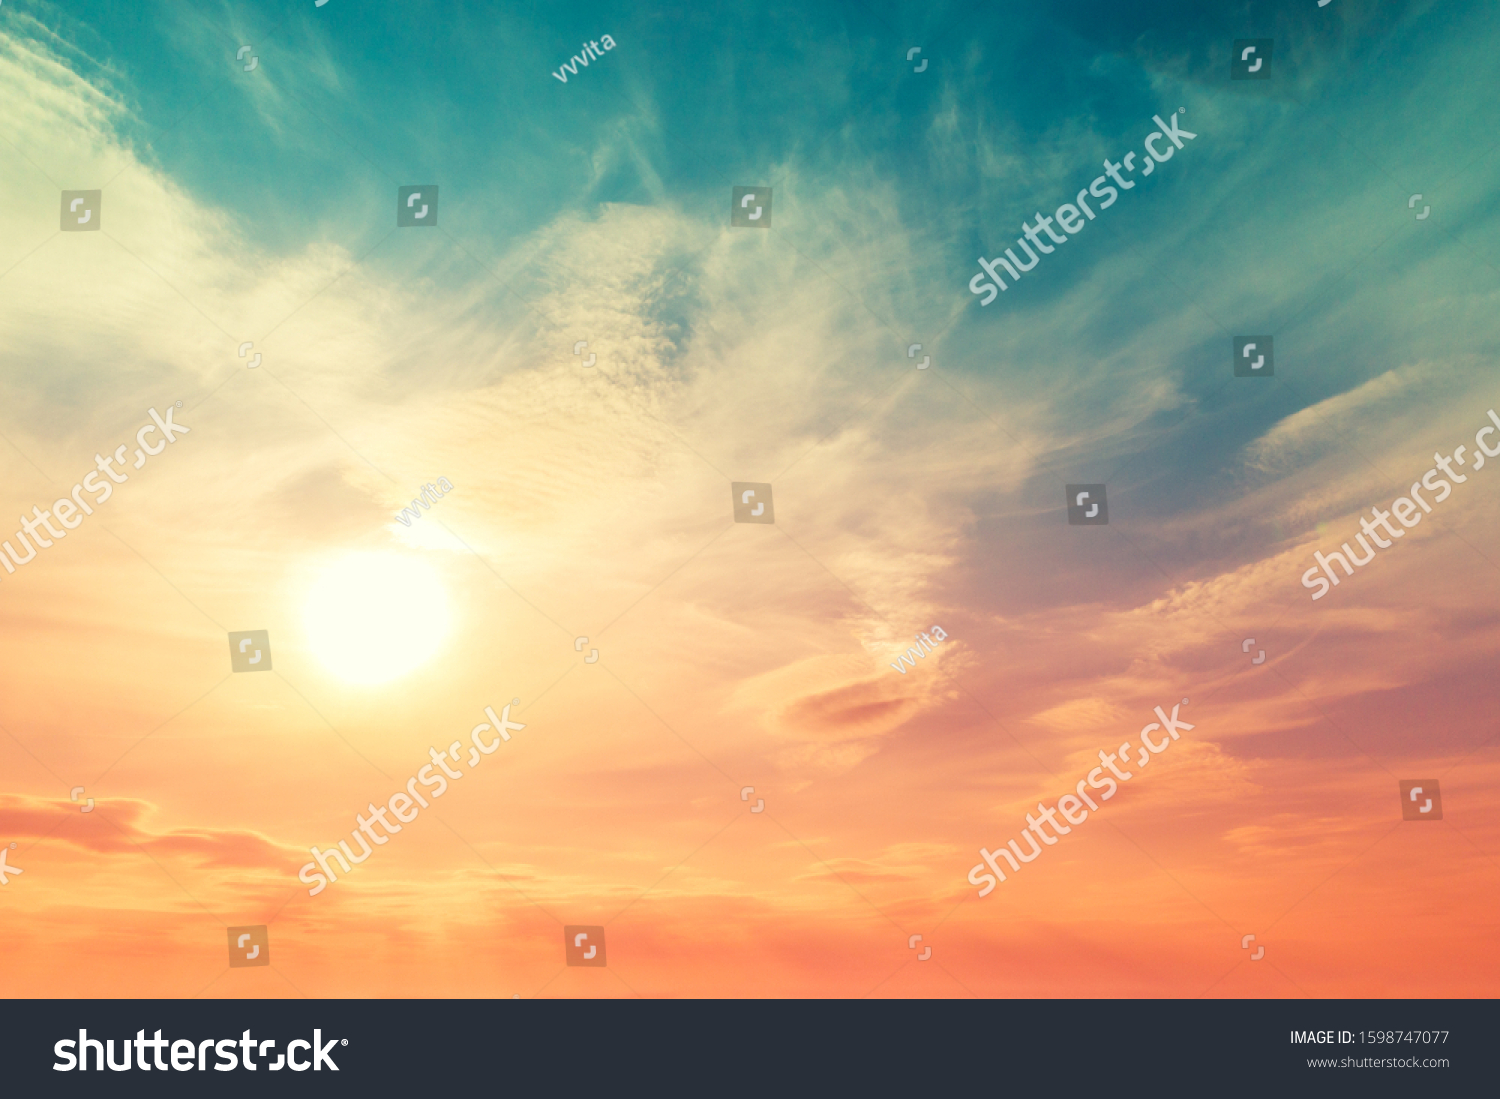 Colorful cloudy sky at sunset. Gradient color. Sky texture, abstract nature background #1598747077